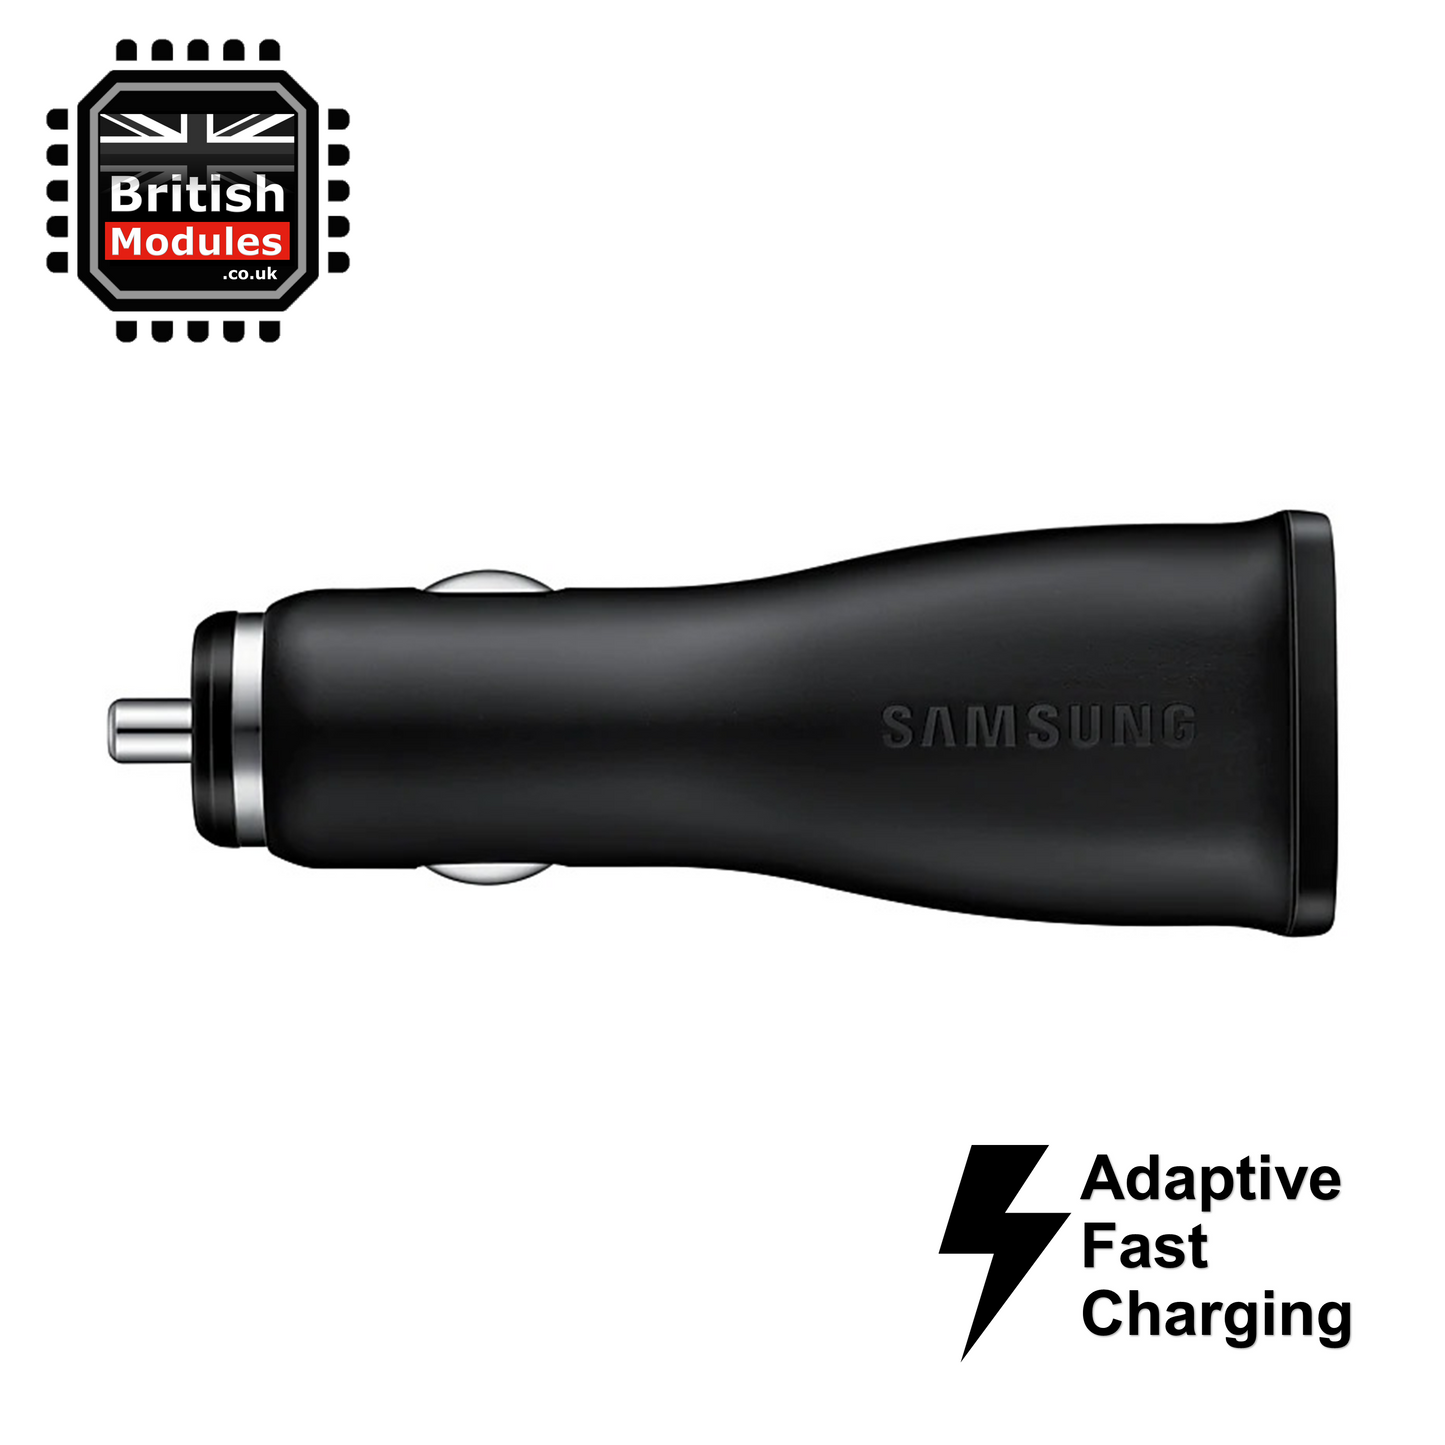 Genuine Samsung EP-LN915U Car Power Adapter Adaptive Fast Charger USB Type C Cable Galaxy S8 S9 S10 + Plus Note 9 8